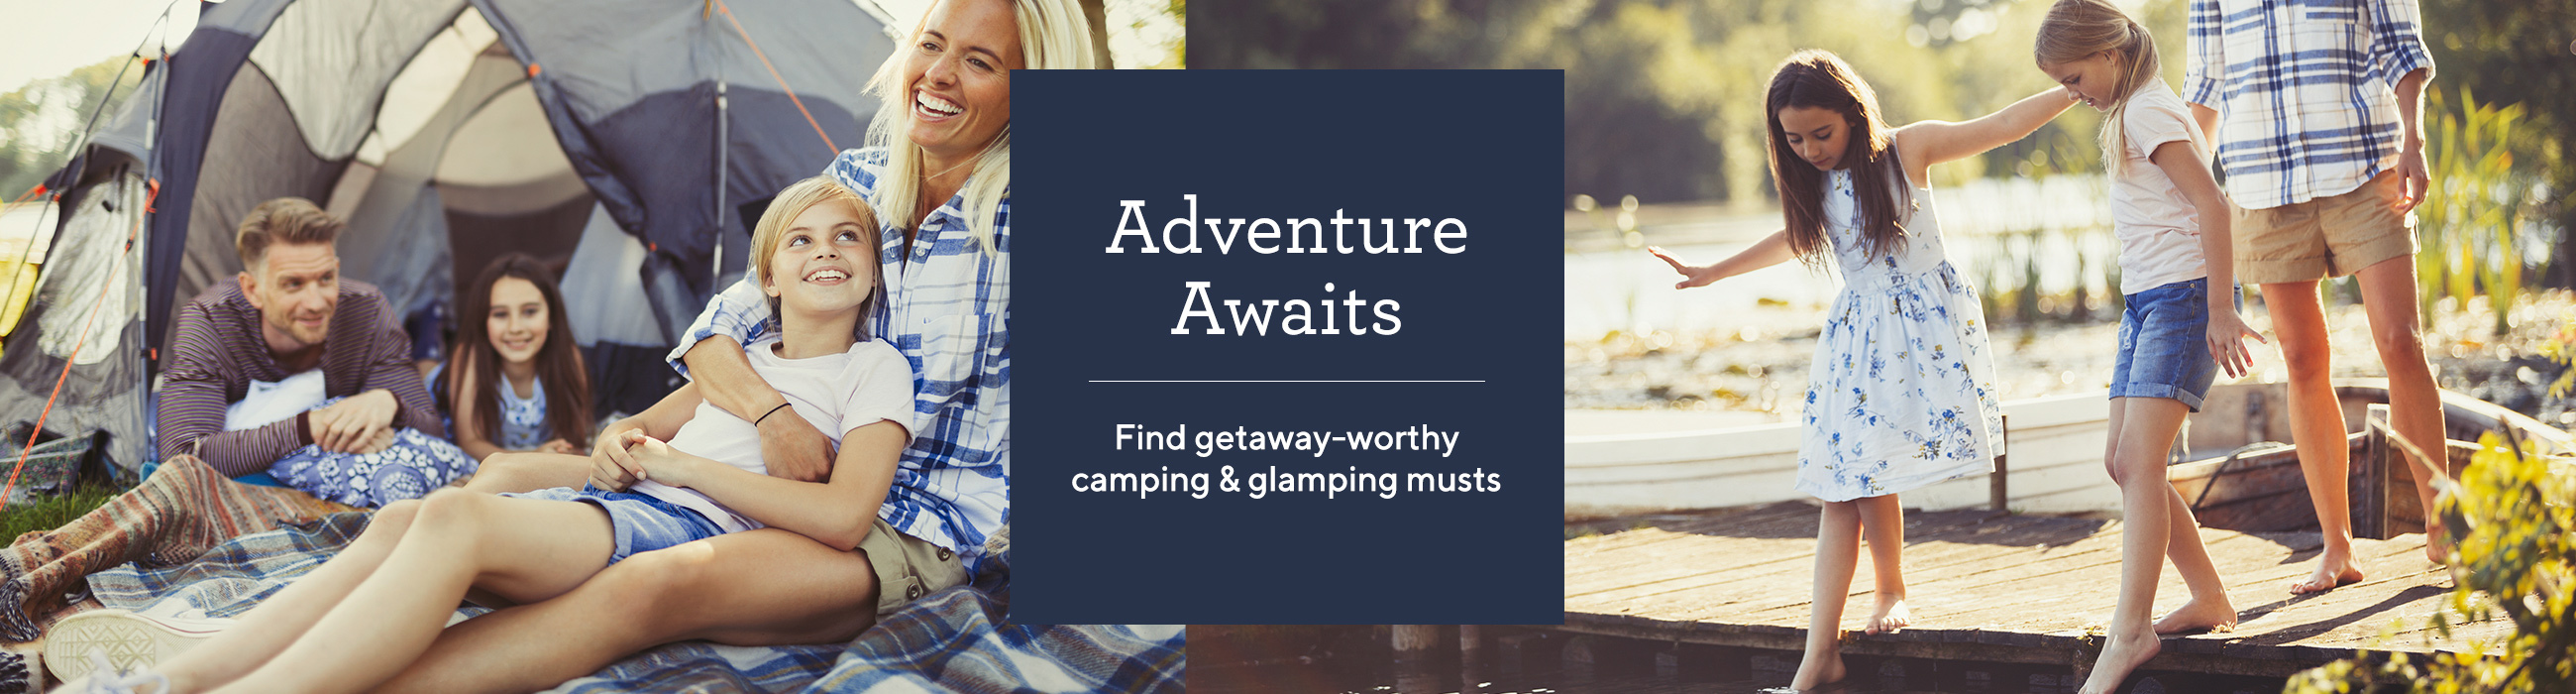 Adventure Awaits.  Find getaway-worthy camping & glamping musts